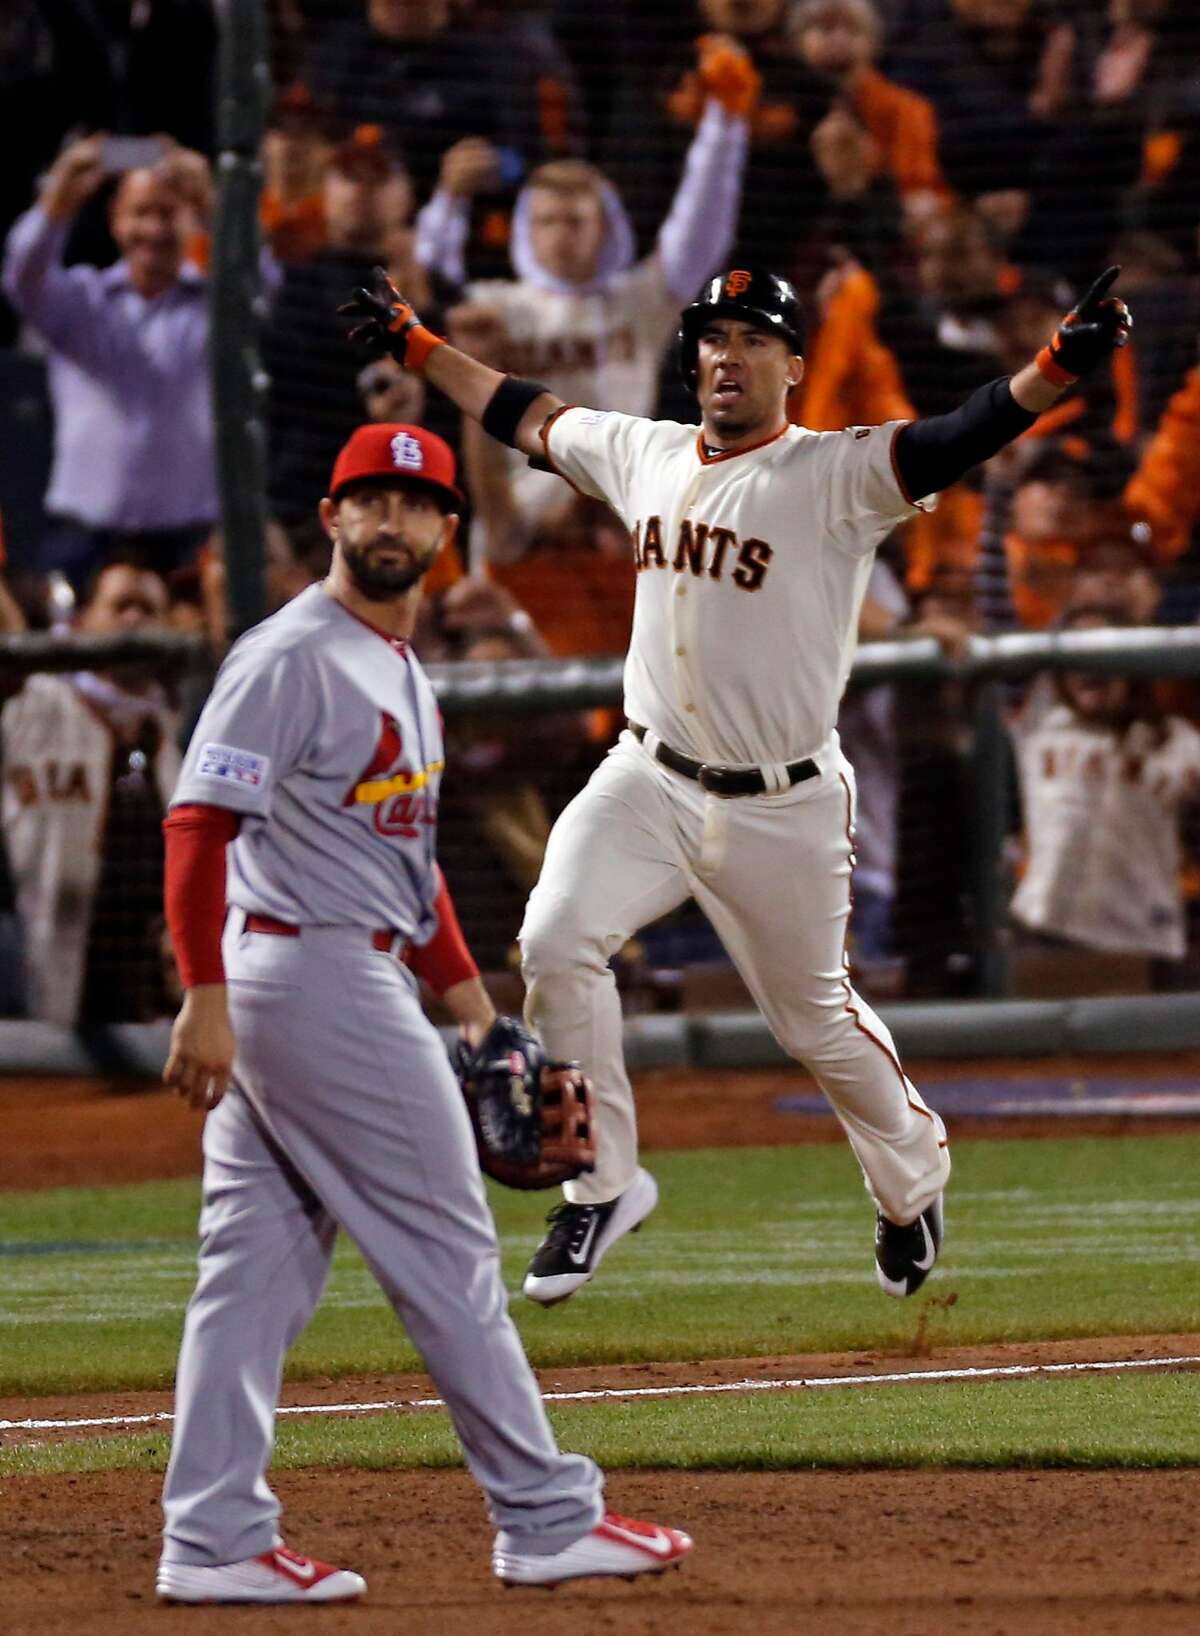 San Francisco Giants' Travis Ishikawa hits a game-winning 3-run home run in 9th inning of 6-3 win over St. Louis Cardinals in Game 5 of the NLCS at AT&T Park in San Francisco, Calif. on Thursday, October 16, 2014.